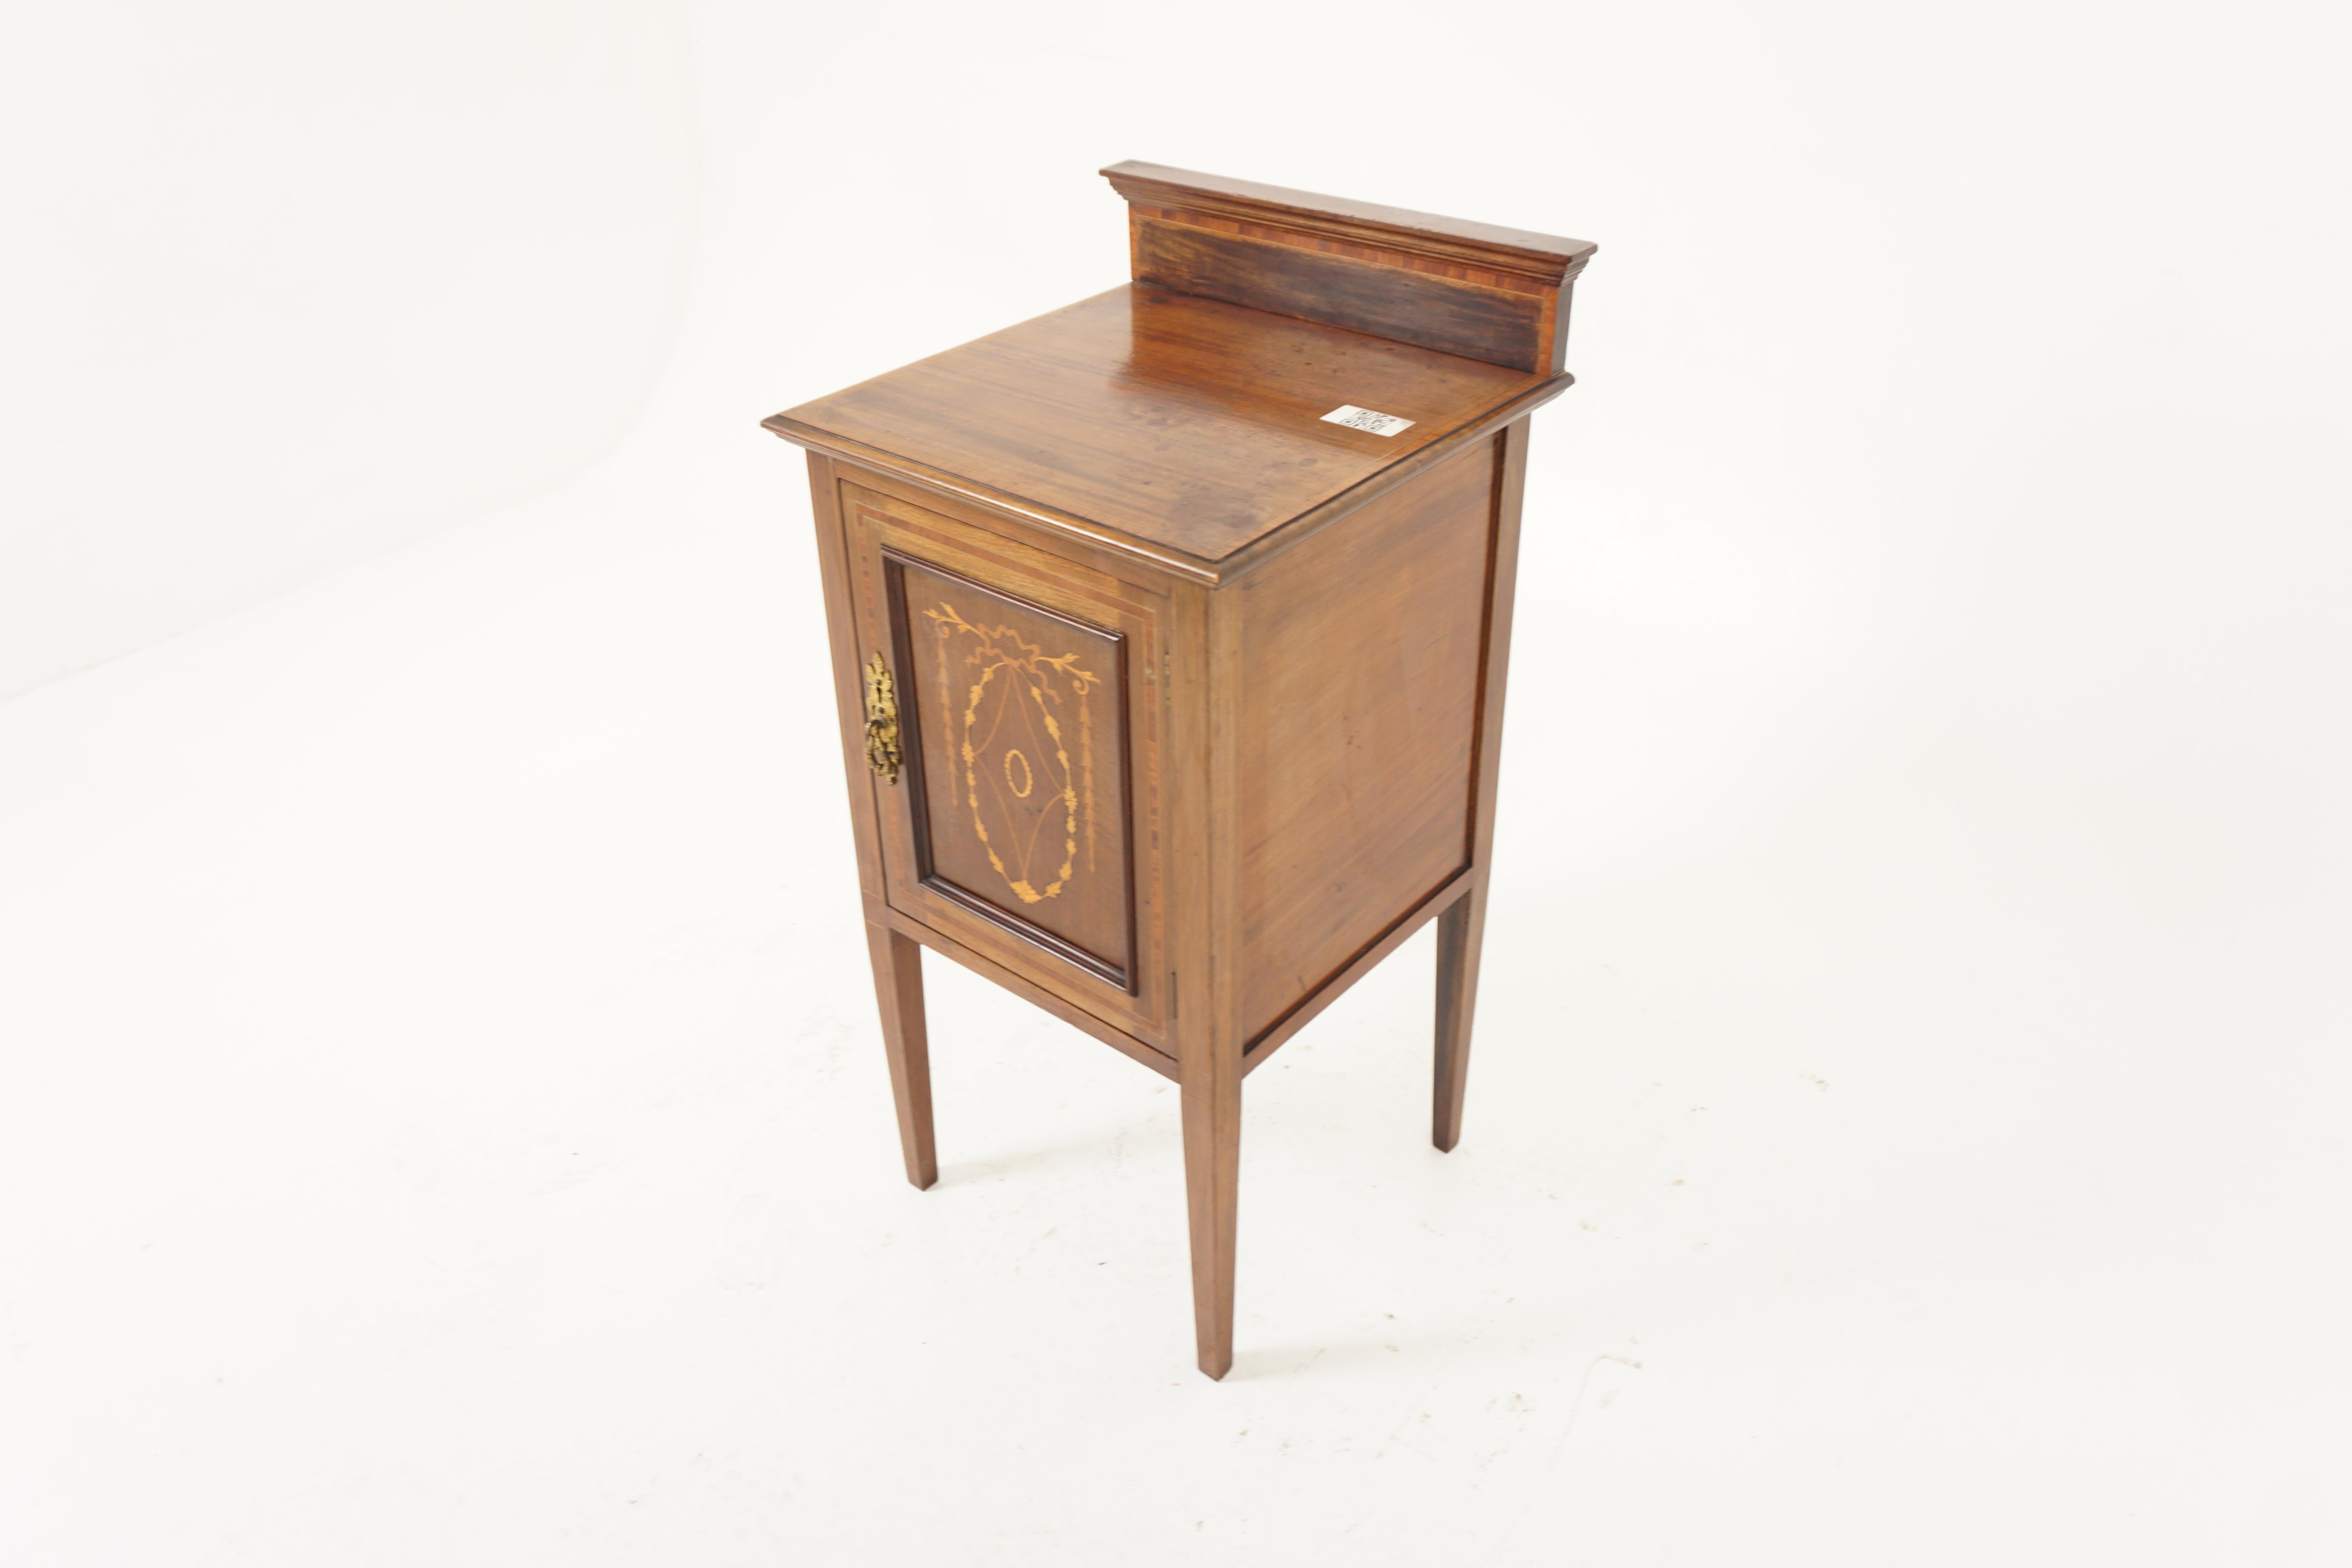 Antique Walnut Nightstand, Sheraton Revival Inlaid Walnut Bedside Table, Antique Furniture, Scotland 1900, H969

+ Scotland 1900
+ Solid Walnut and Veneer (satinwood and boxwood)
+ Original Finish
+ Raised gallery and rectangular top are both